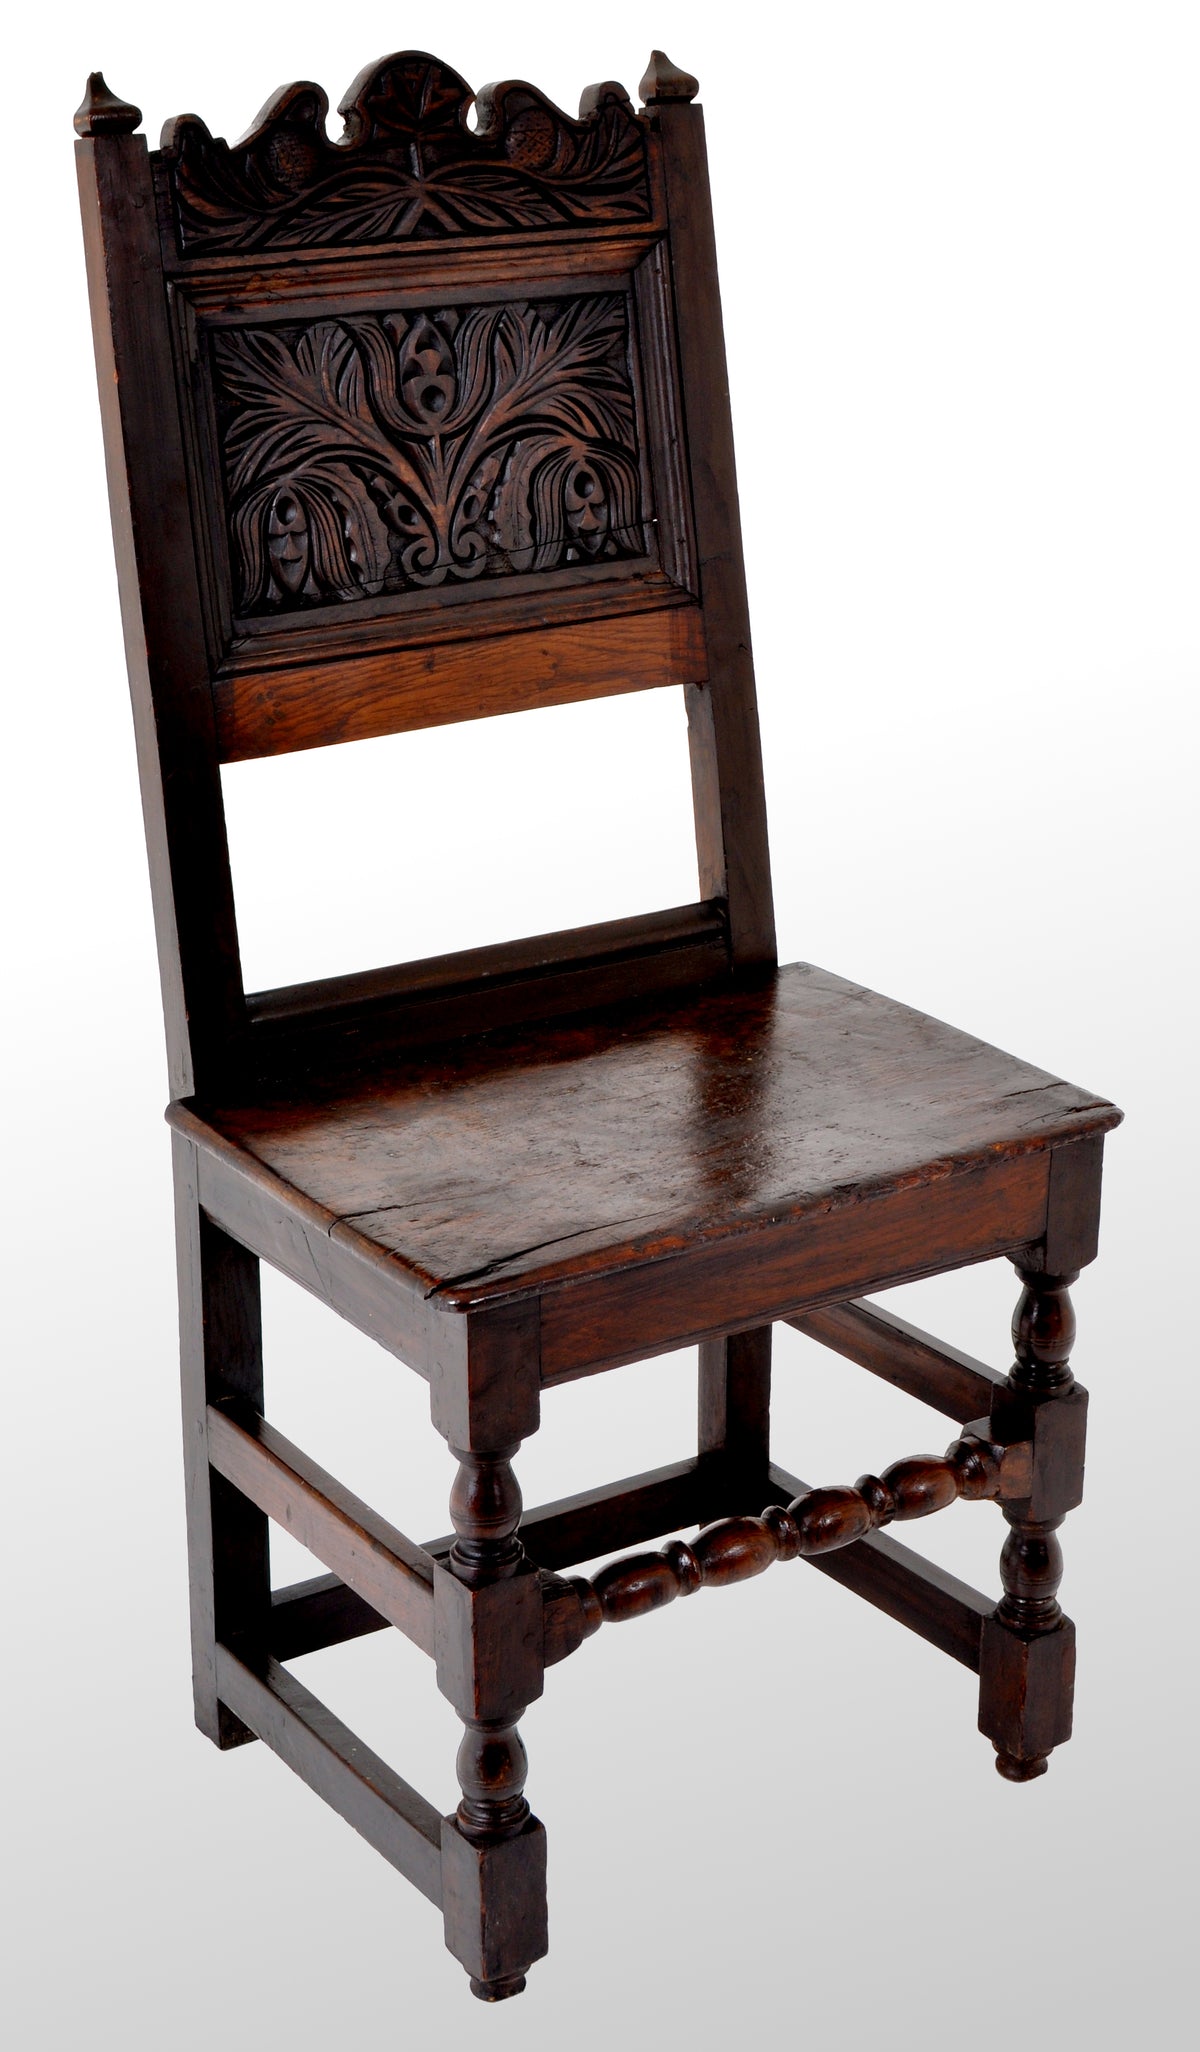 Antique 17th Century English Jacobean Carved Oak Joined Chair, circa 1640